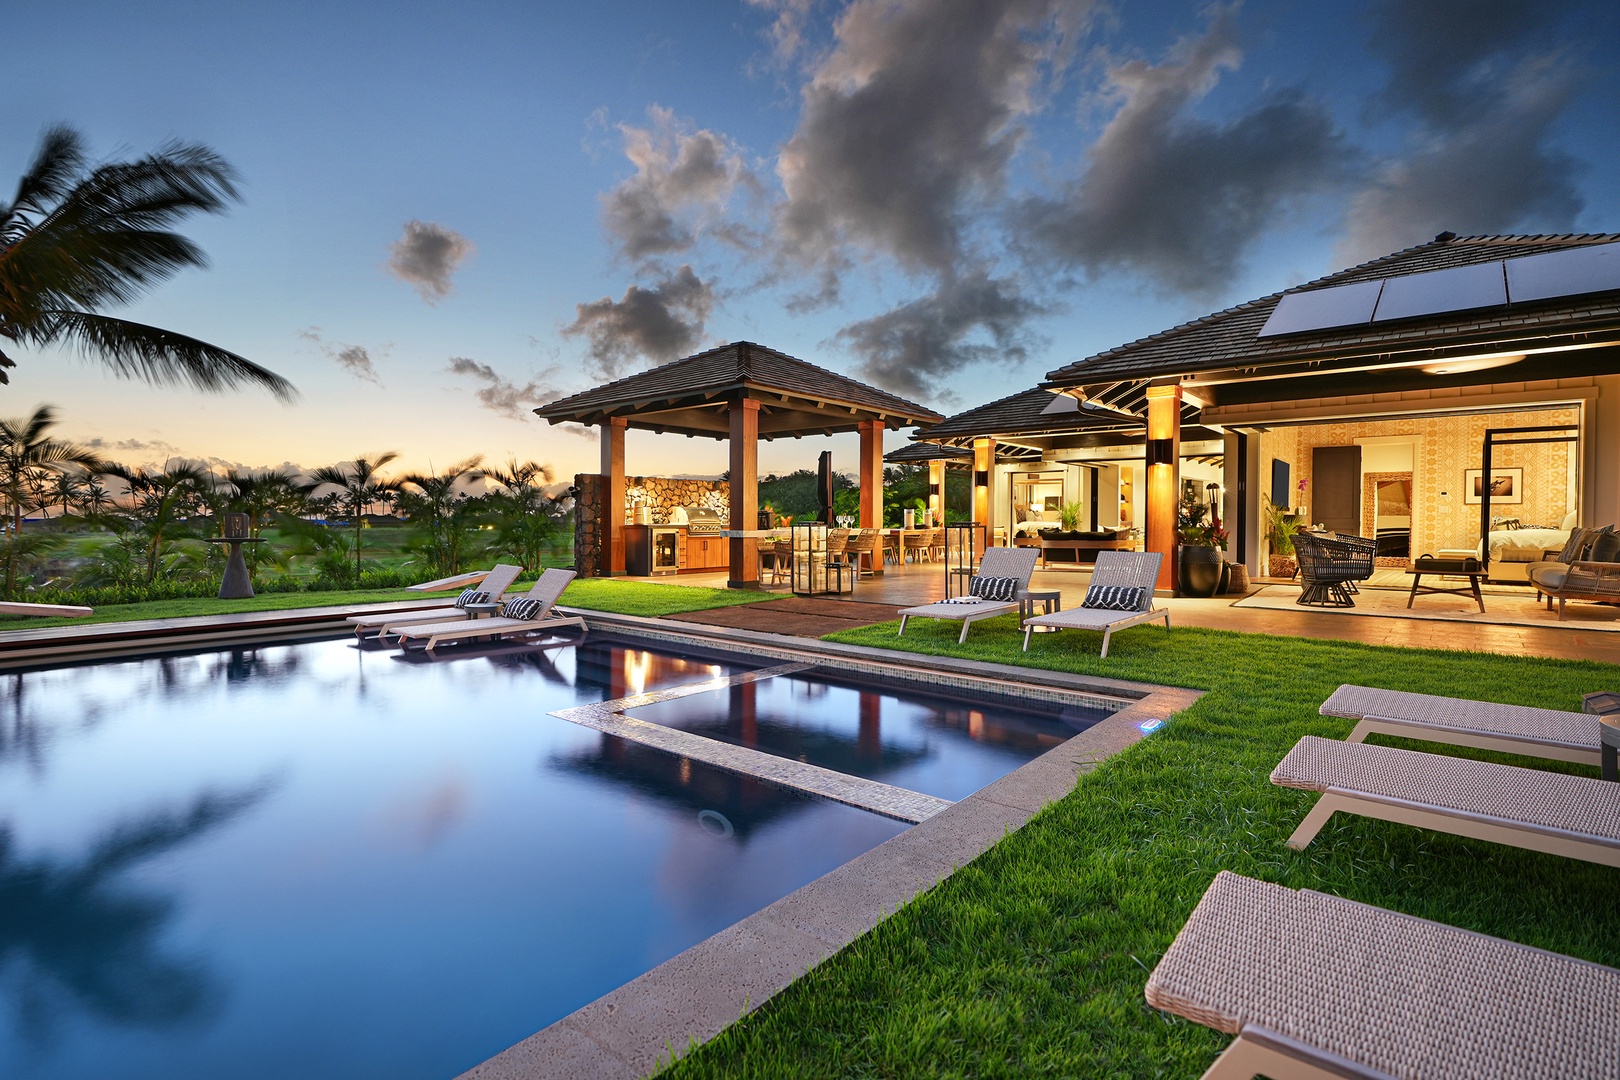 Koloa Vacation Rentals, Hale Pakika at Kukui'ula - Immerse yourself in luxury at Hale Pakika at Kukui'ula, outdoor living space, ama this pool and spa combo, featuring plentiful seating for sun-soaked gatherings or relaxing days..